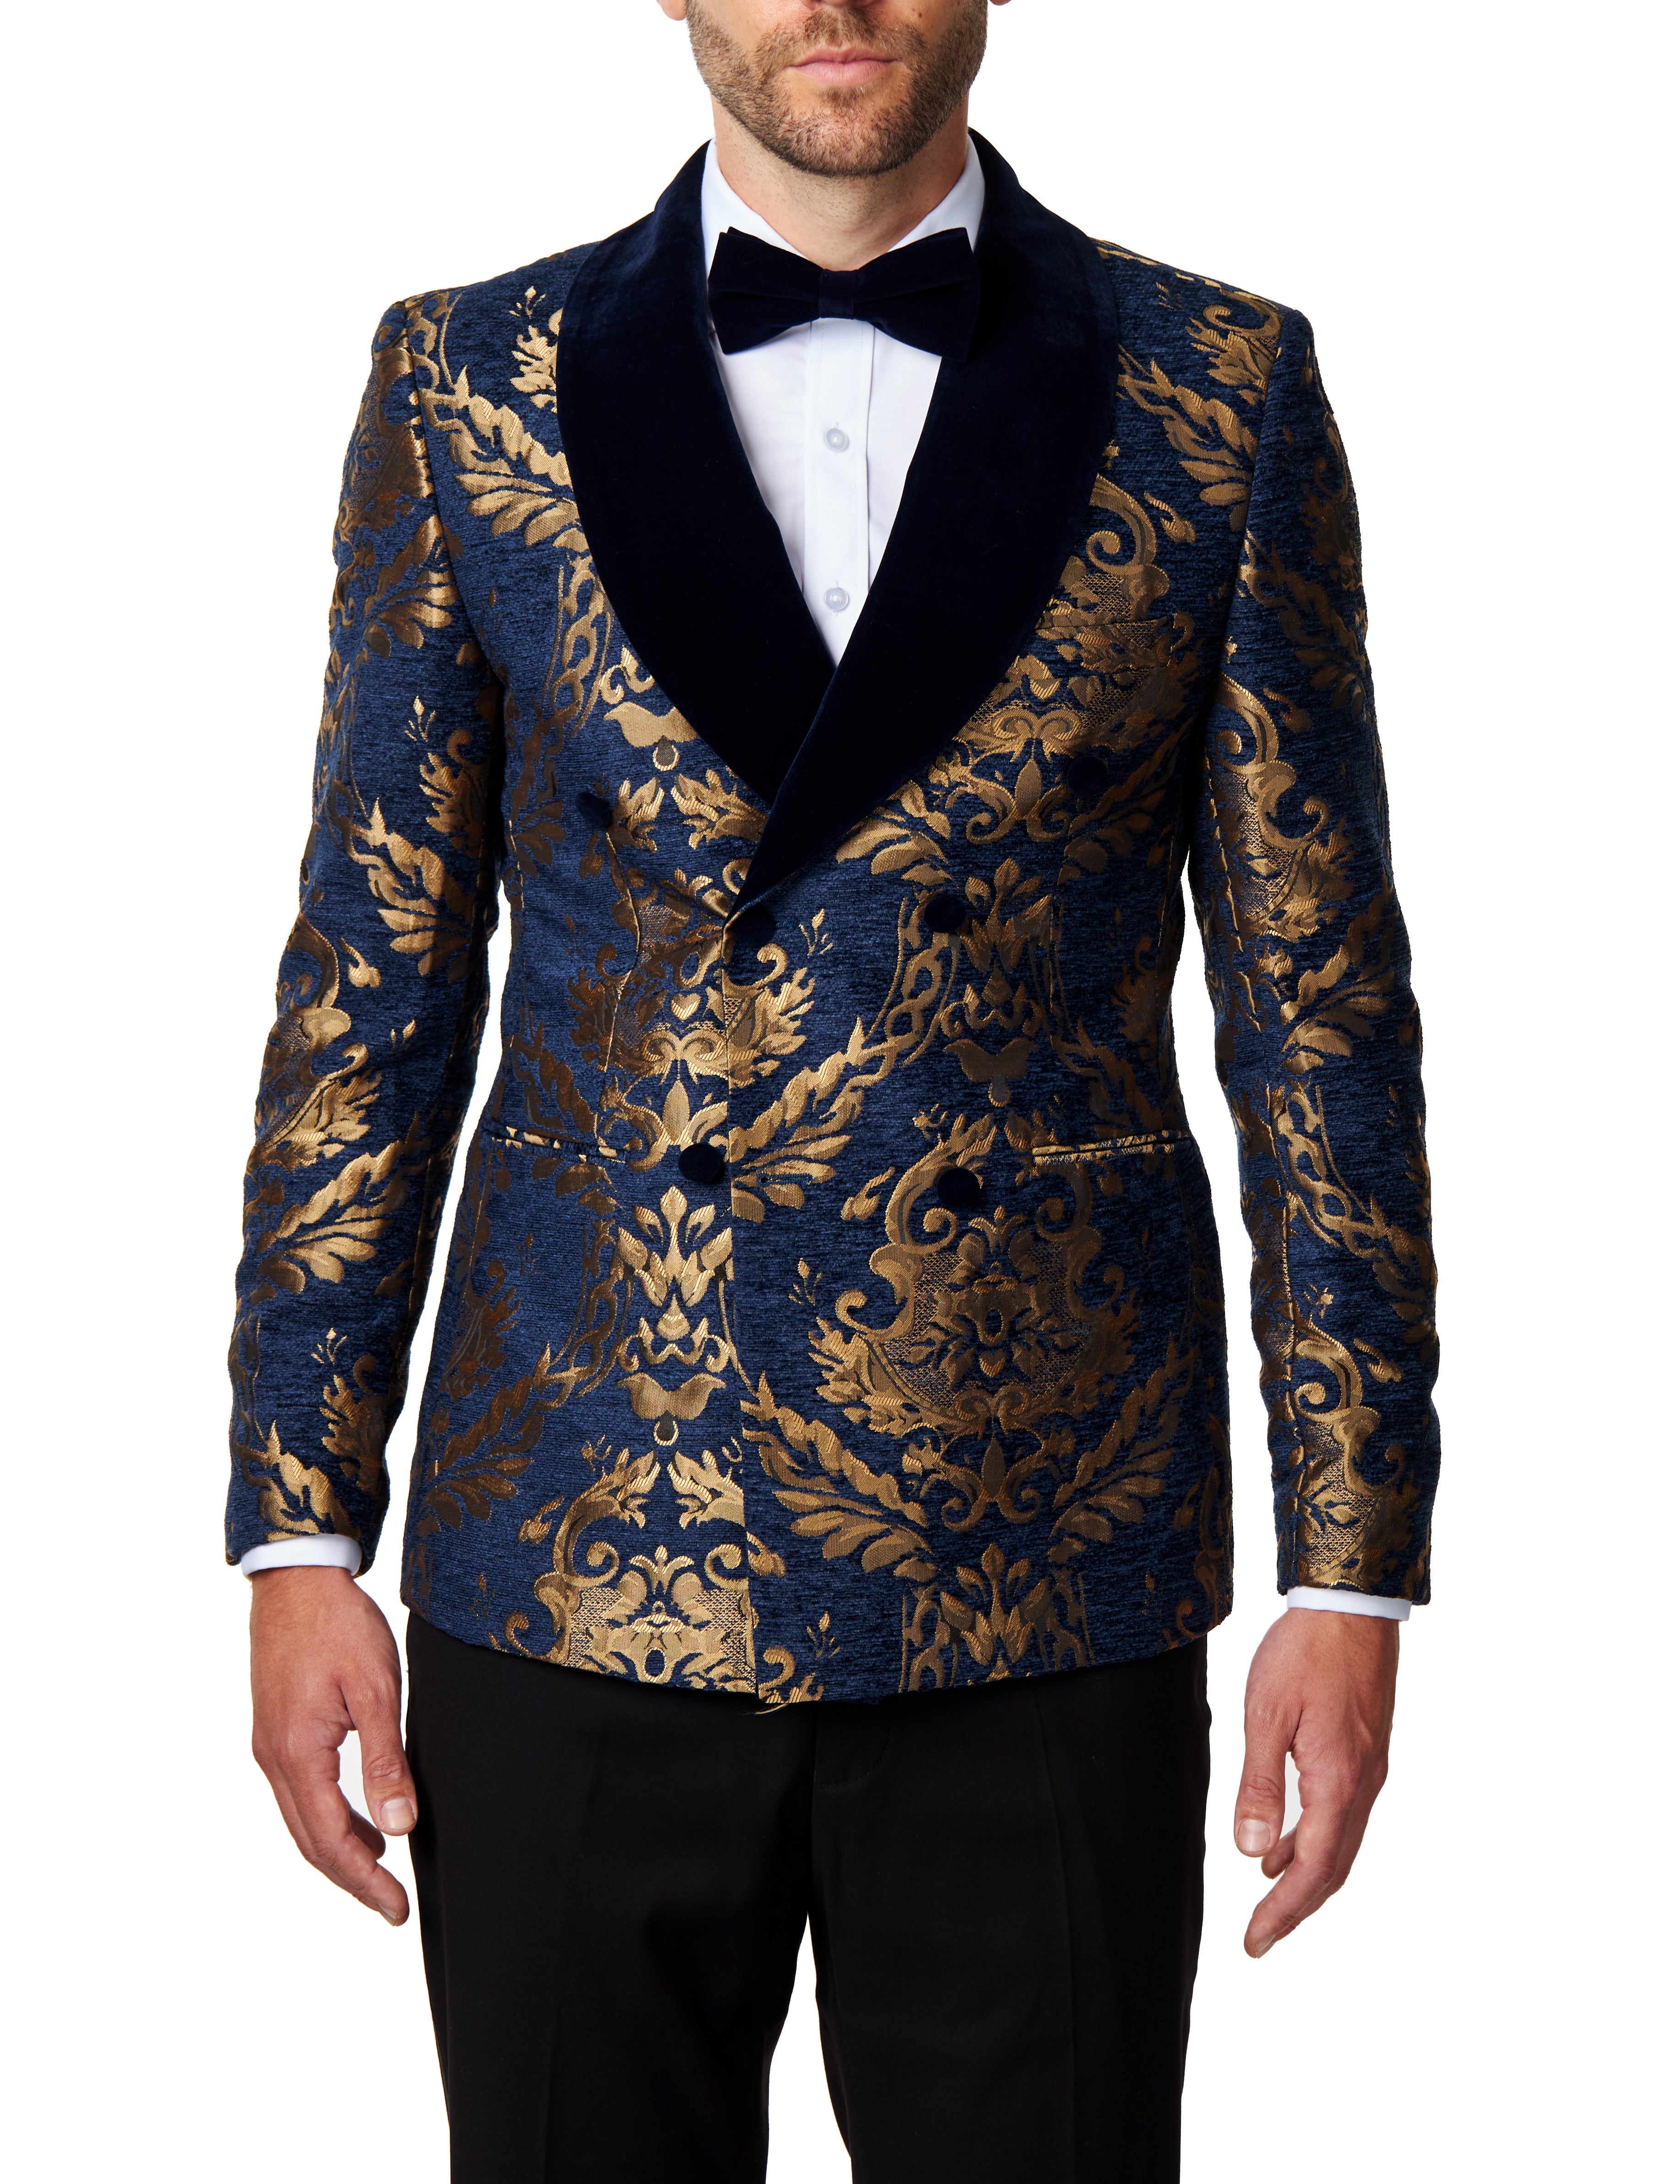 Gold Brocade on Navy Jacquard Double Breasted Jacket